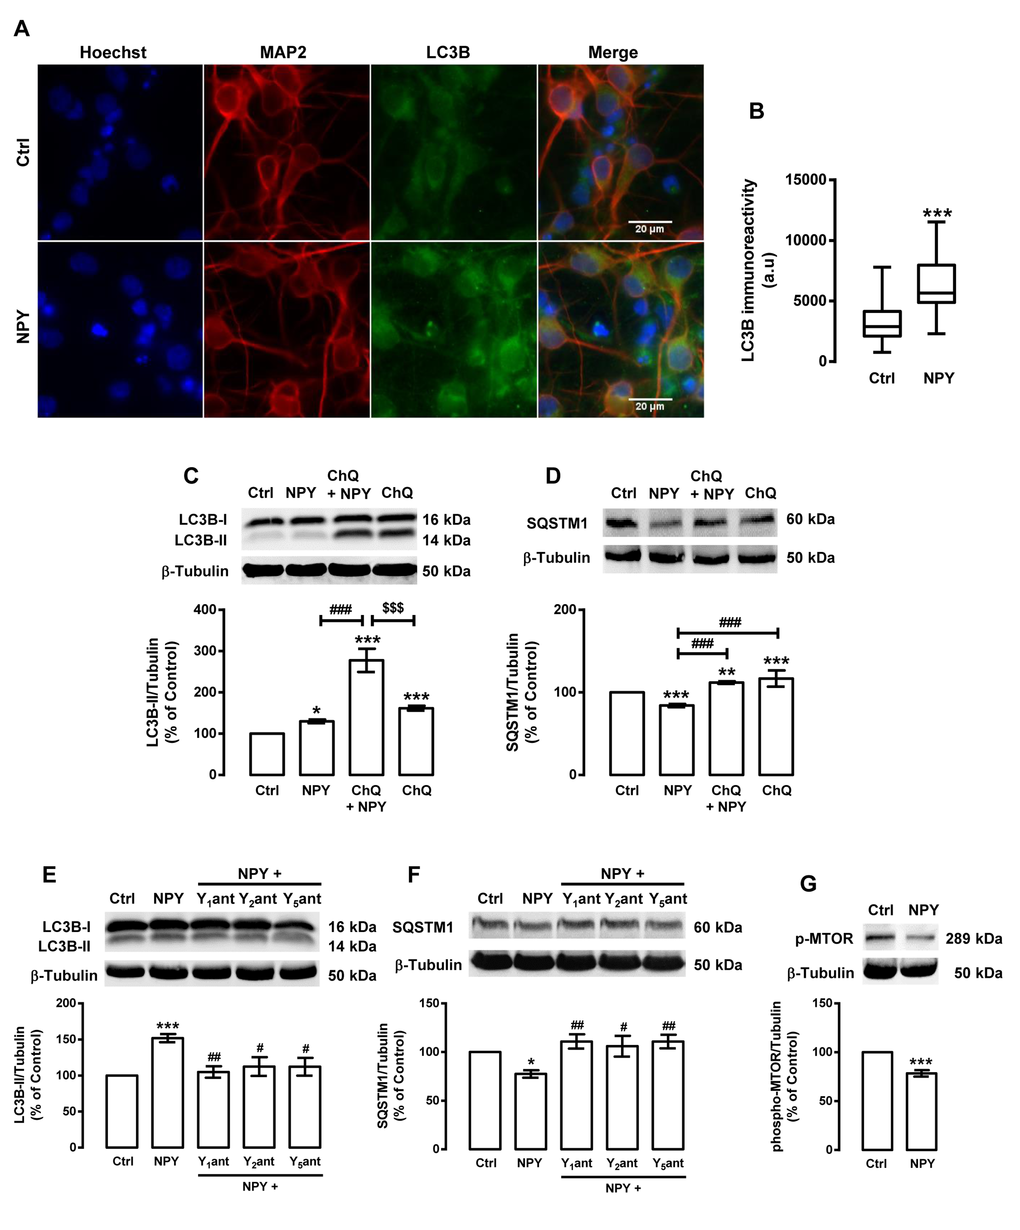 NPY increases autophagy in rat cortical neurons. Primary rat cortical neurons were exposed to NPY (100 nM) for 6 h. Untreated cells were used as control (Ctrl). (A) LC3B distribution was assessed by immunocytochemistry assay, as described in Materials and Methods. Cells were immunolabeled for LC3B (green) and MAP2 (red, neurons). Nuclei were stained with Hoechst 33342 (blue). Figures are representative of three independents experiments. Scale bar, 20 μM. (B) Quantification of the number of LC3B puncta immunoreactivity (green) per cell in each condition (>20 cells per group). ***pC-G) Cells were incubated with chloroquine (ChQ, 100 μM) (C and D), or with Y1 receptor antagonist BIBP3226 (Y1ant, 1 μM), Y2 receptor antagonist BIIE0246 (Y2ant, 1 μM) or Y5 receptor antagonist L152,800 (Y5ant, 1 μM) (E and F), 30 min before NPY (100 nM) . Whole cell extracts were assayed for LC3B-II (C and E), SQSTM1 (D and F), phospho-MTOR (p-MTOR) (G) and β-tubulin (loading control) immunoreactivity through Western blotting analysis, as described in Materials and Methods. Representative Western blots for each protein are presented above each respective graph. The results represent the mean ± SEM of, at least, five independents experiments, and are expressed as percentage of control. *p#p##p###p$$$p